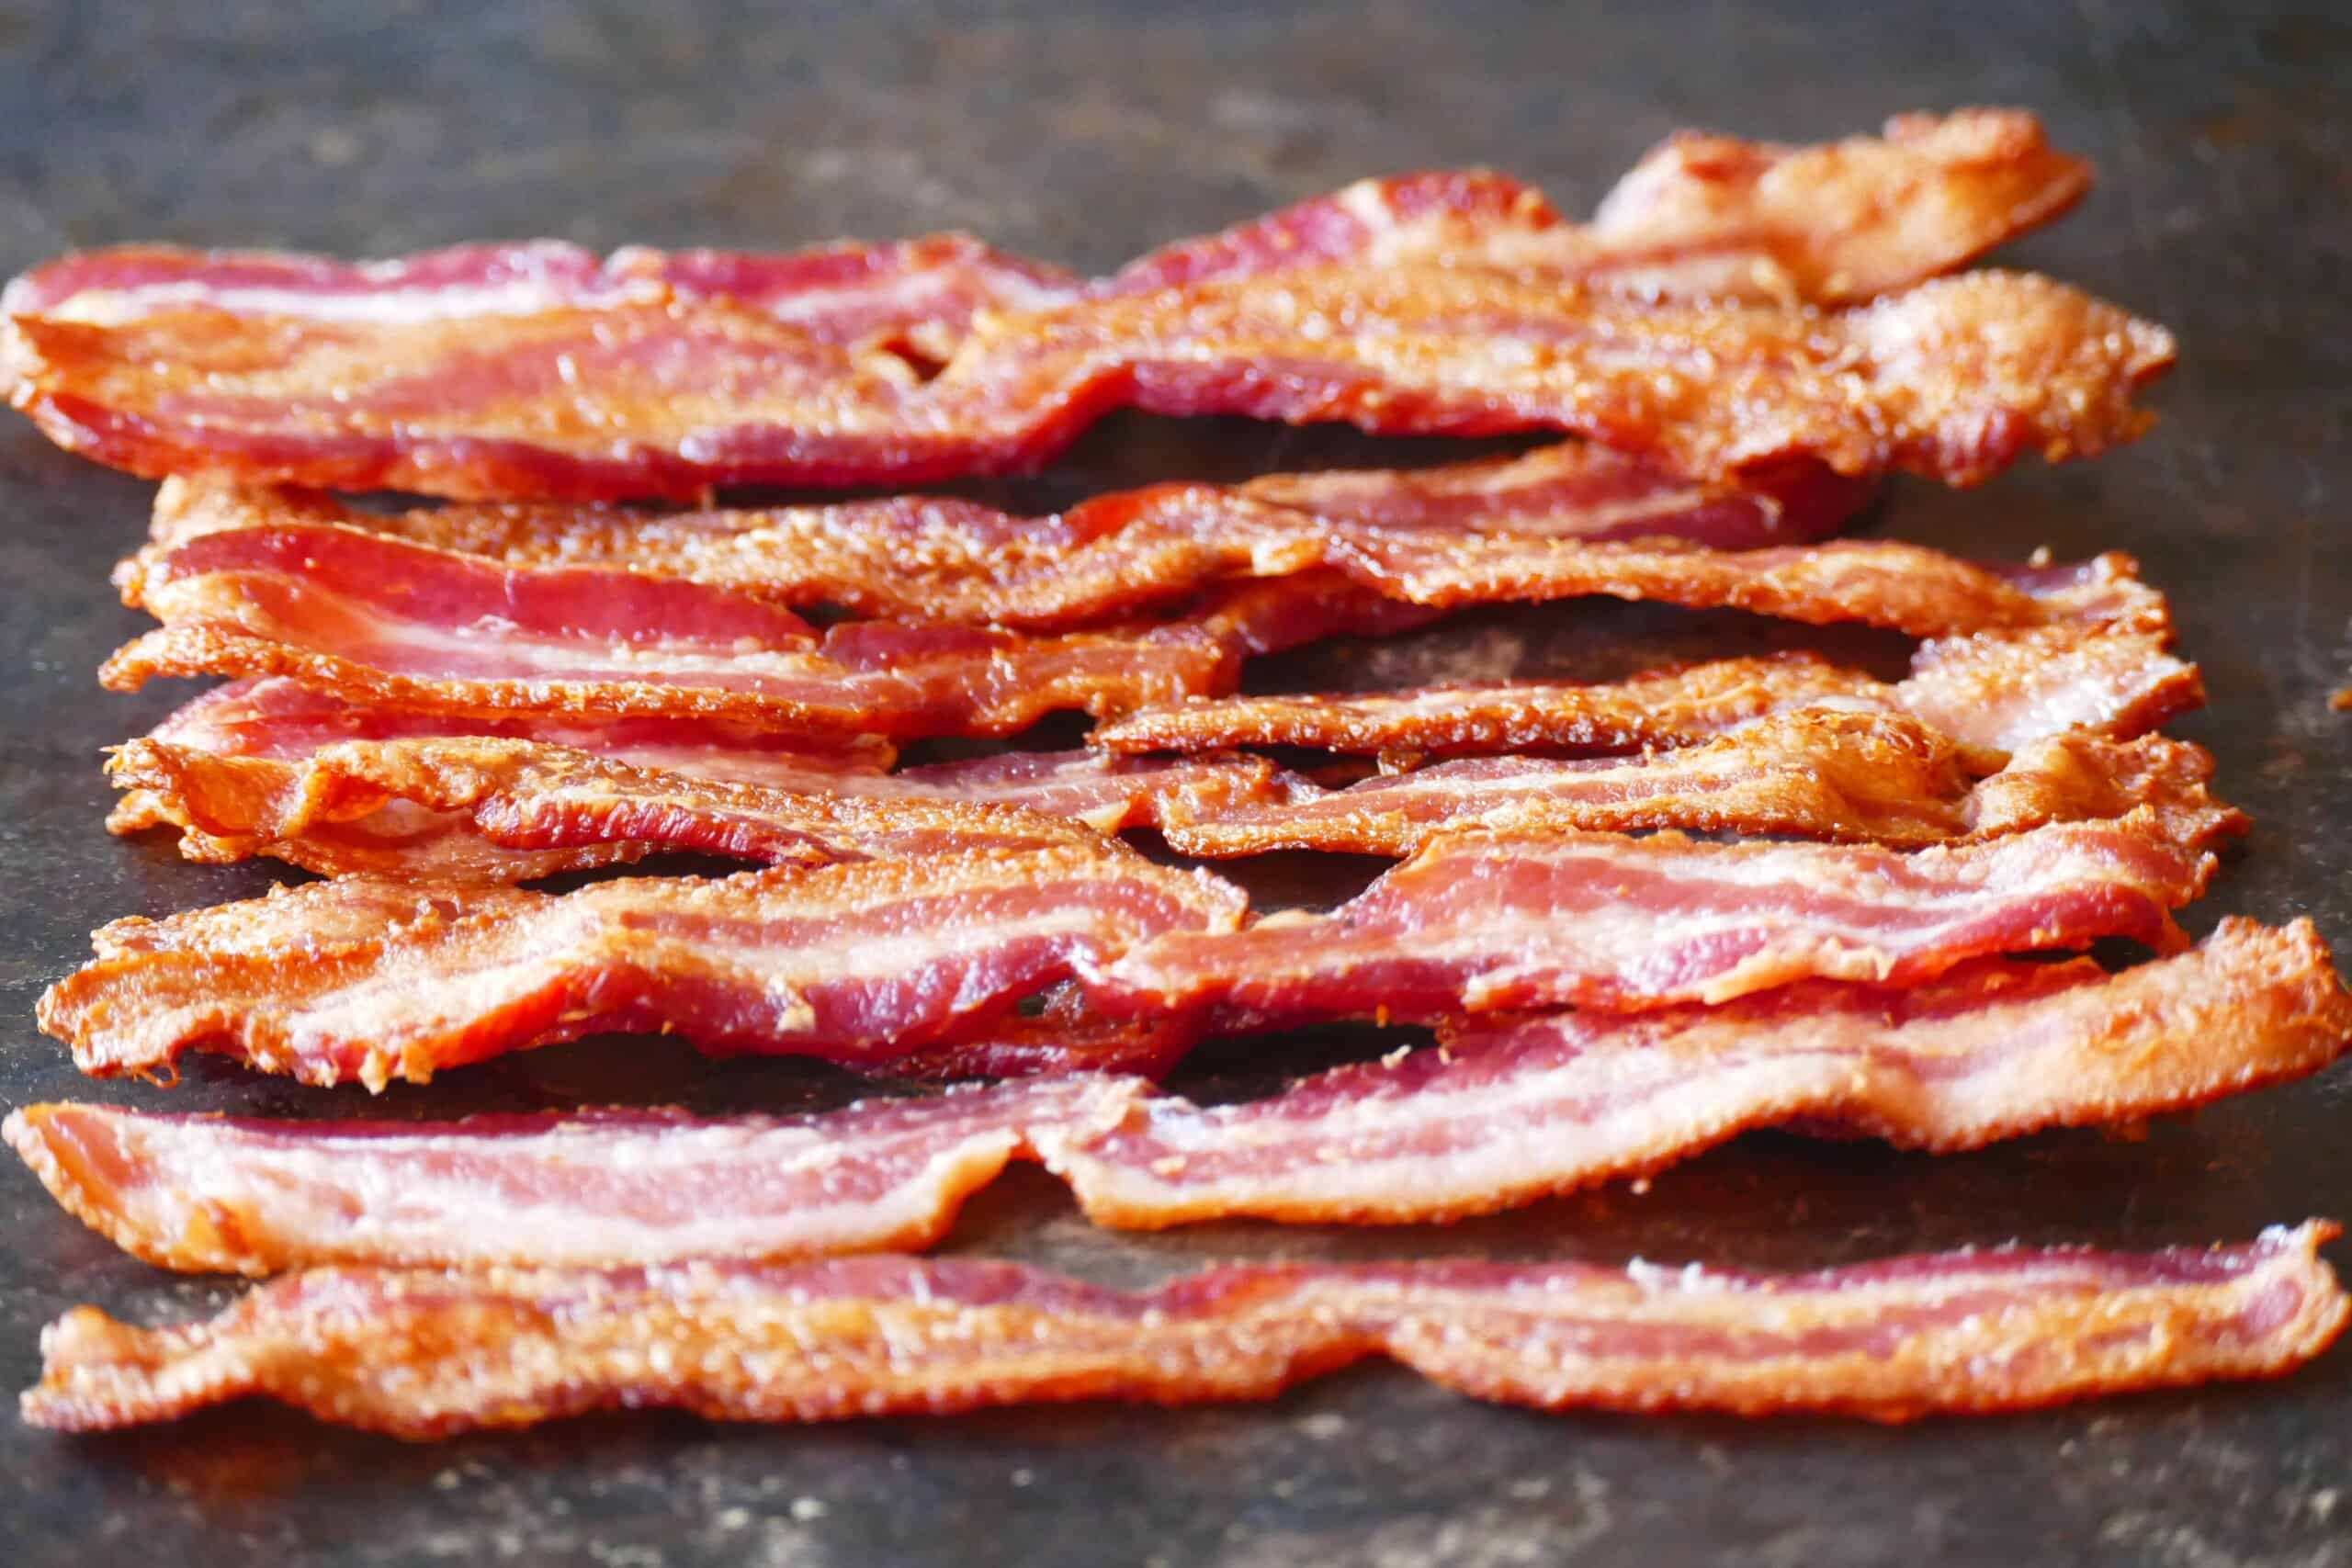 https://www.paintthekitchenred.com/wp-content/uploads/2022/04/Air-Fryer-Bacon-L1-Paint-the-Kitchen-Red-scaled.jpg